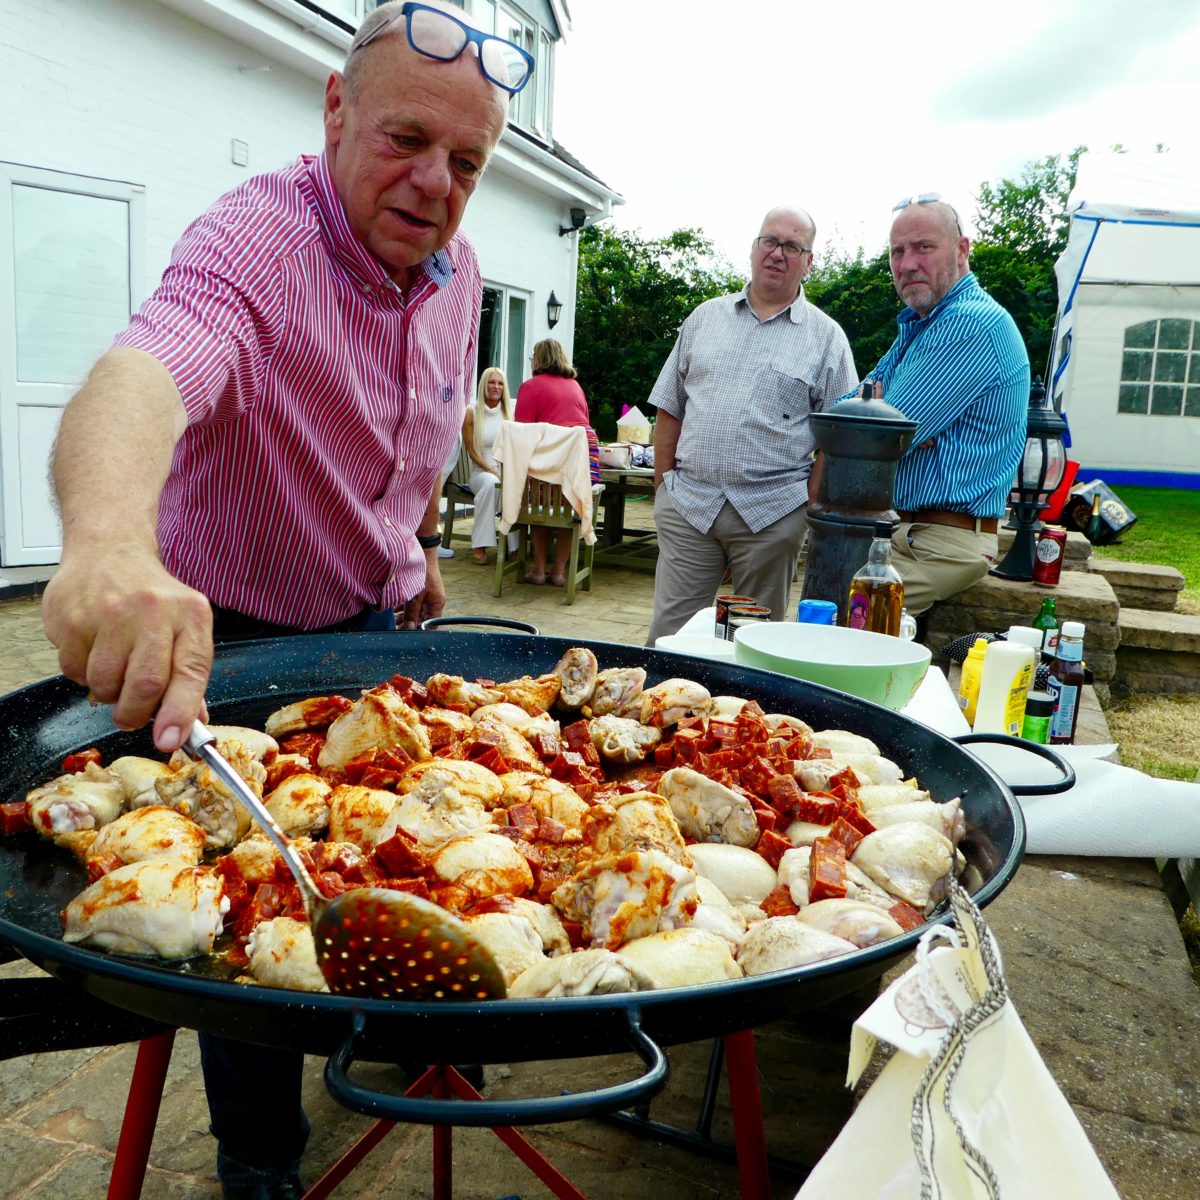 Family Matters 2 – Paella Party at the Clemmows’